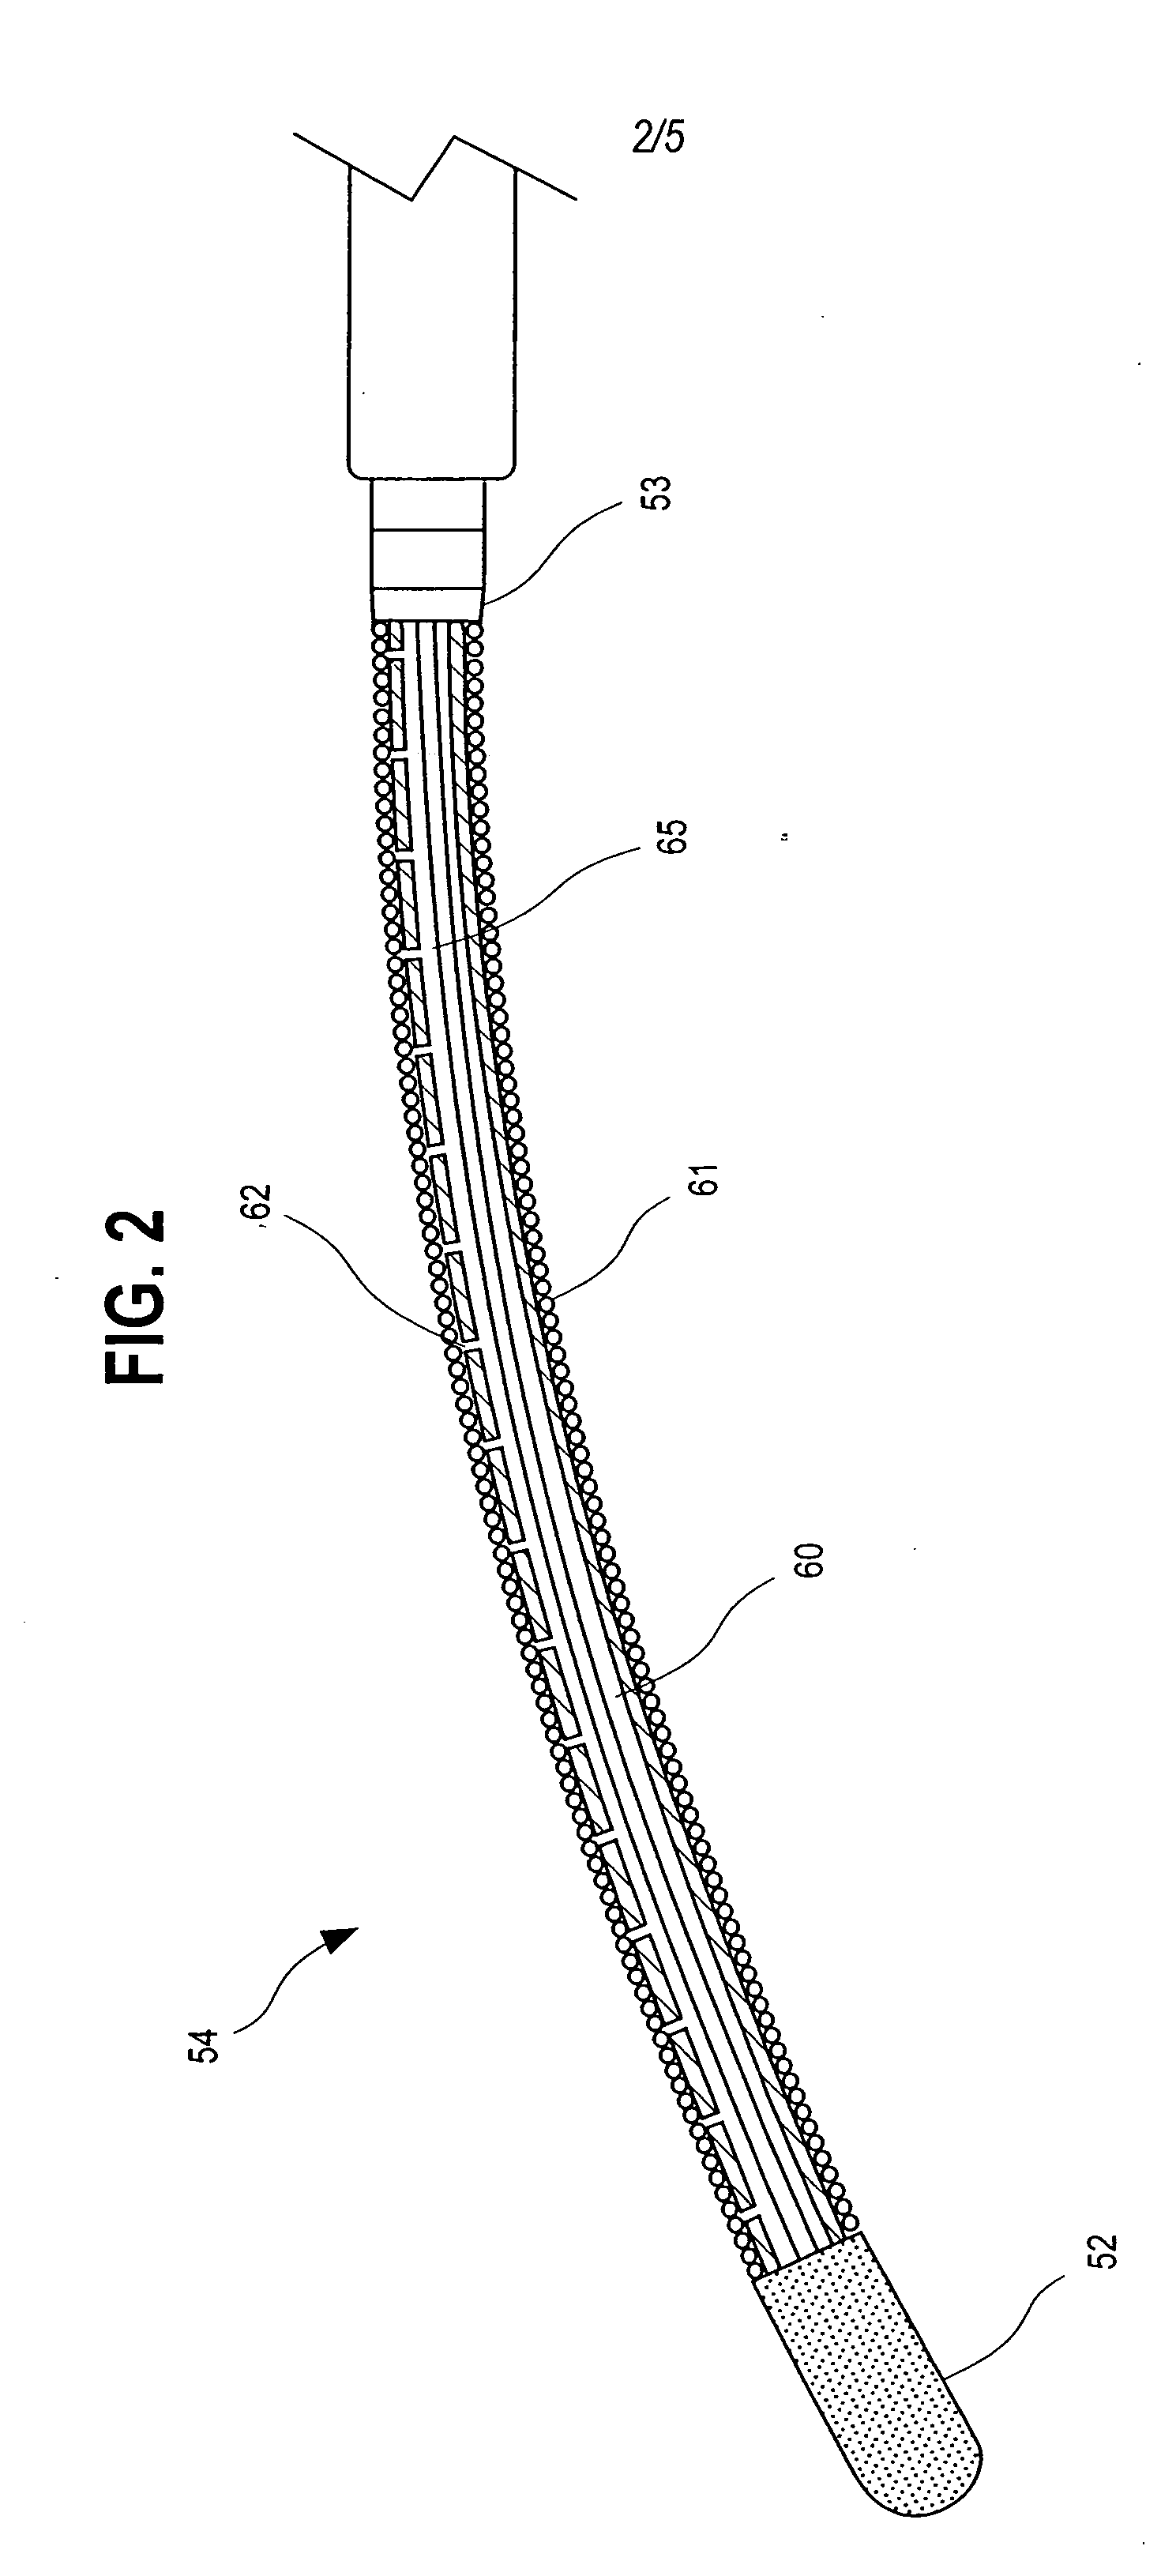 Ablation catheter with cooled linear electrode